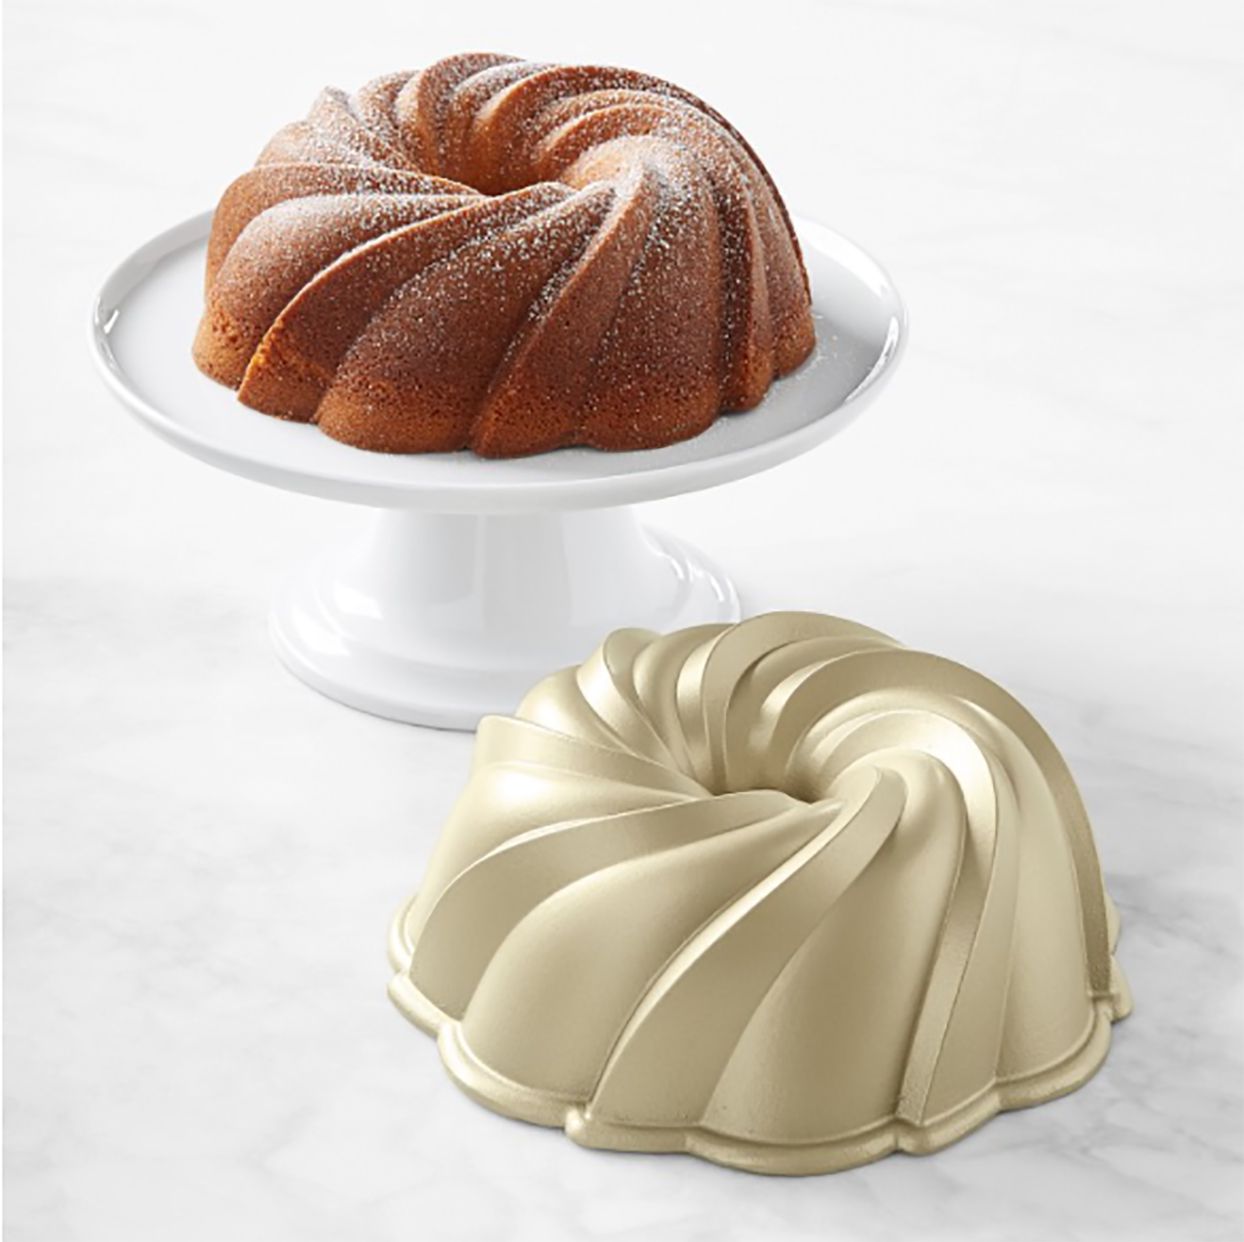 Swirl Bundt Ring Cake Bread Pastry Silicone Mold Pan Bake Mould YU